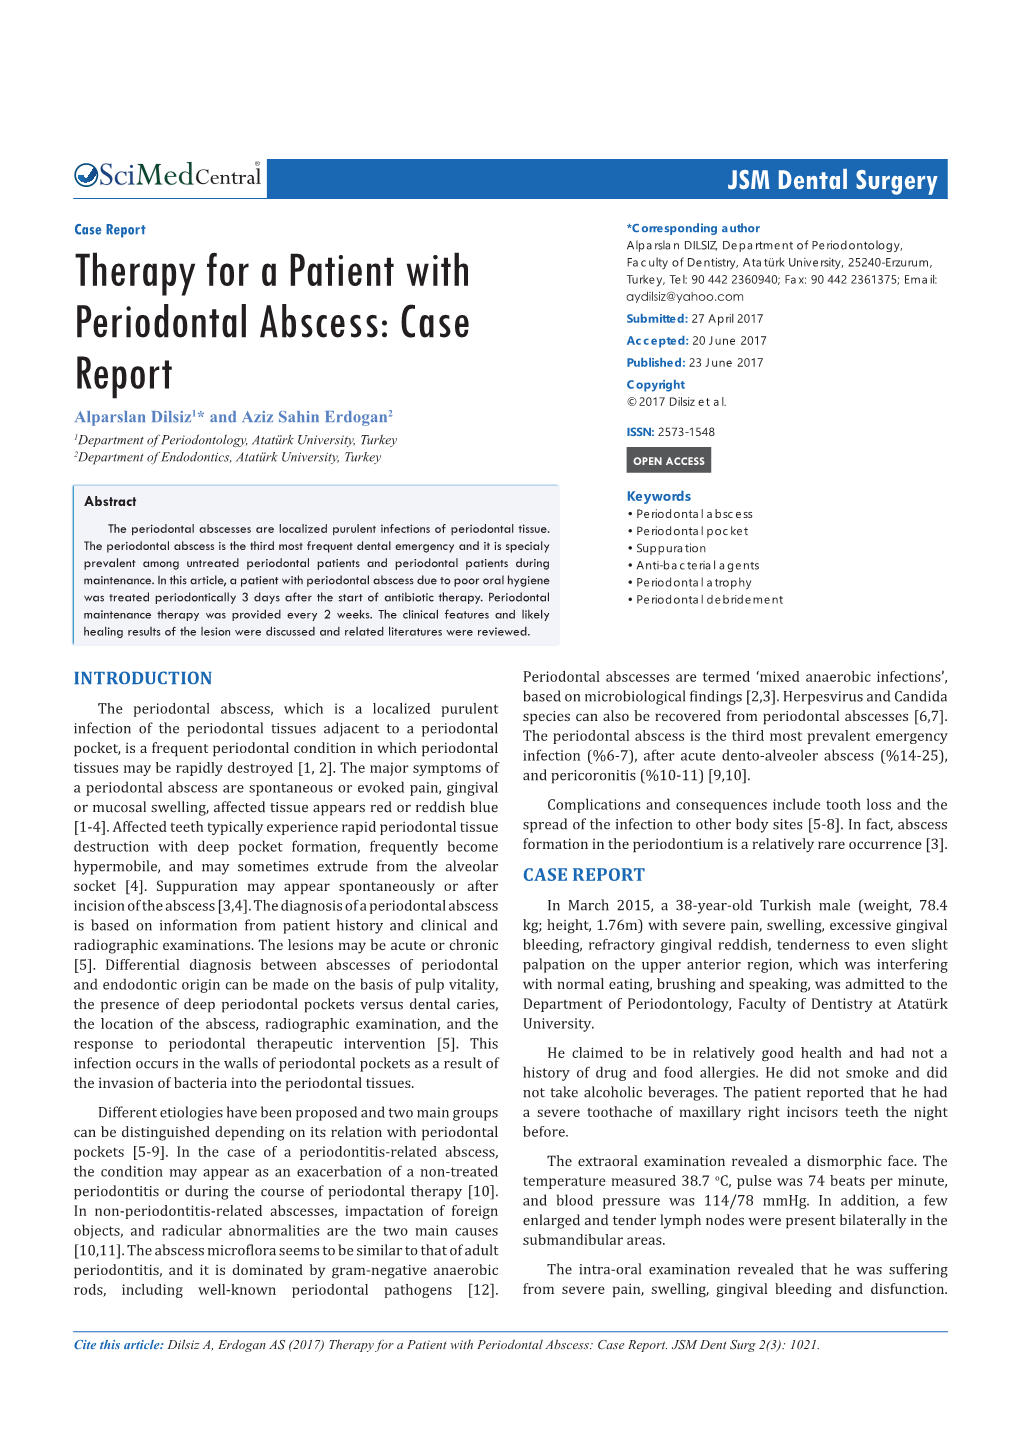 Therapy for a Patient with Periodontal Abscess: Case Report